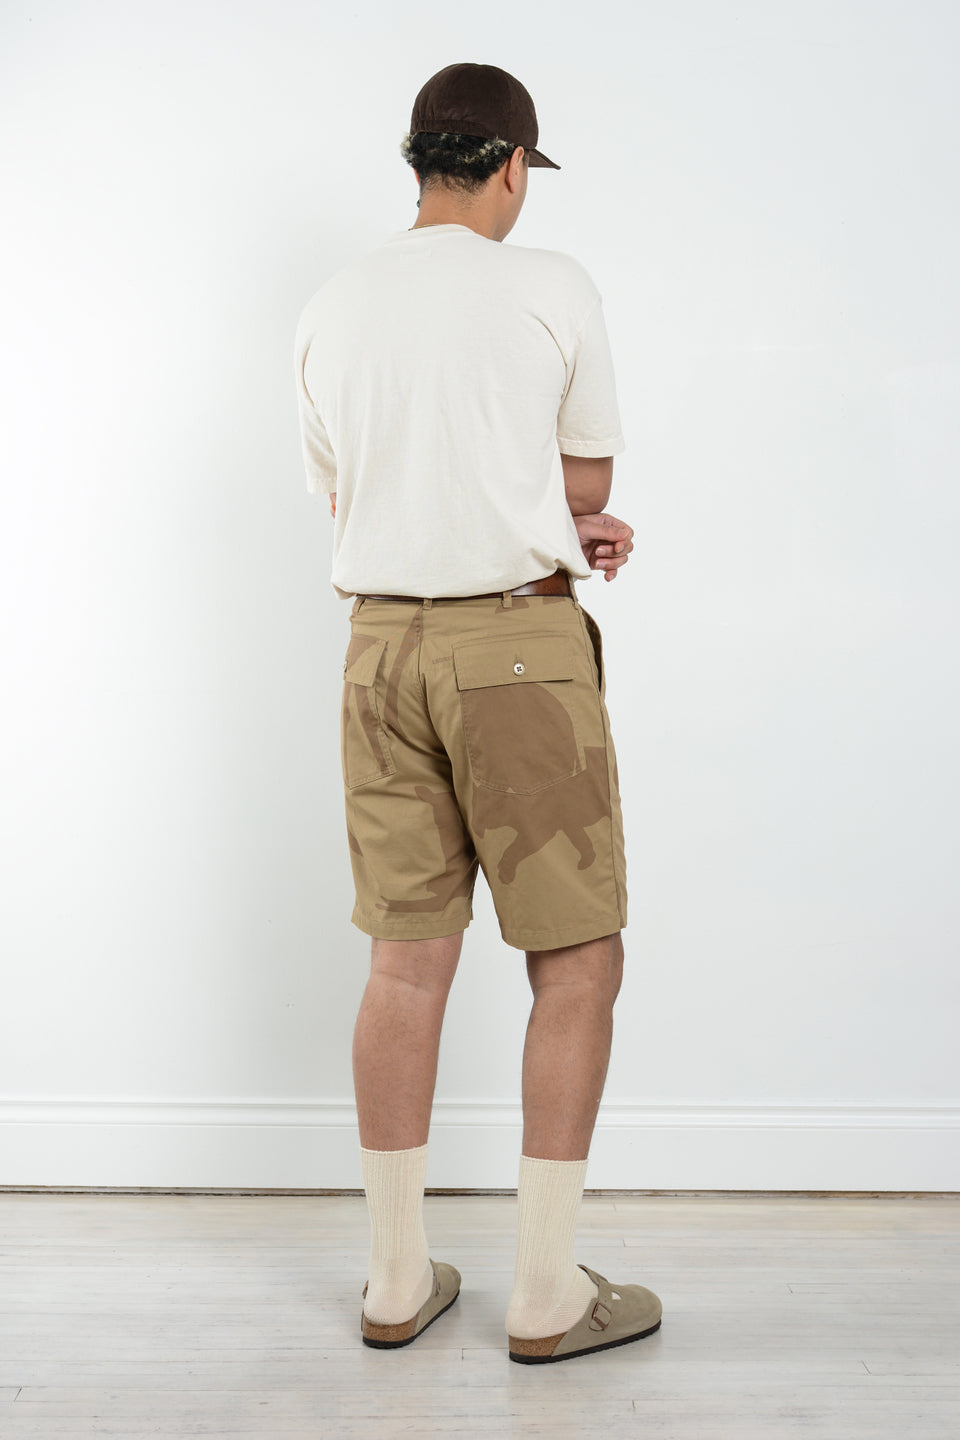 Engineered Garments SS22 Nepenthes New York Fatigue Short Khaki Animal Print Cotton Flat Twill Calculus Victoria BC Canada